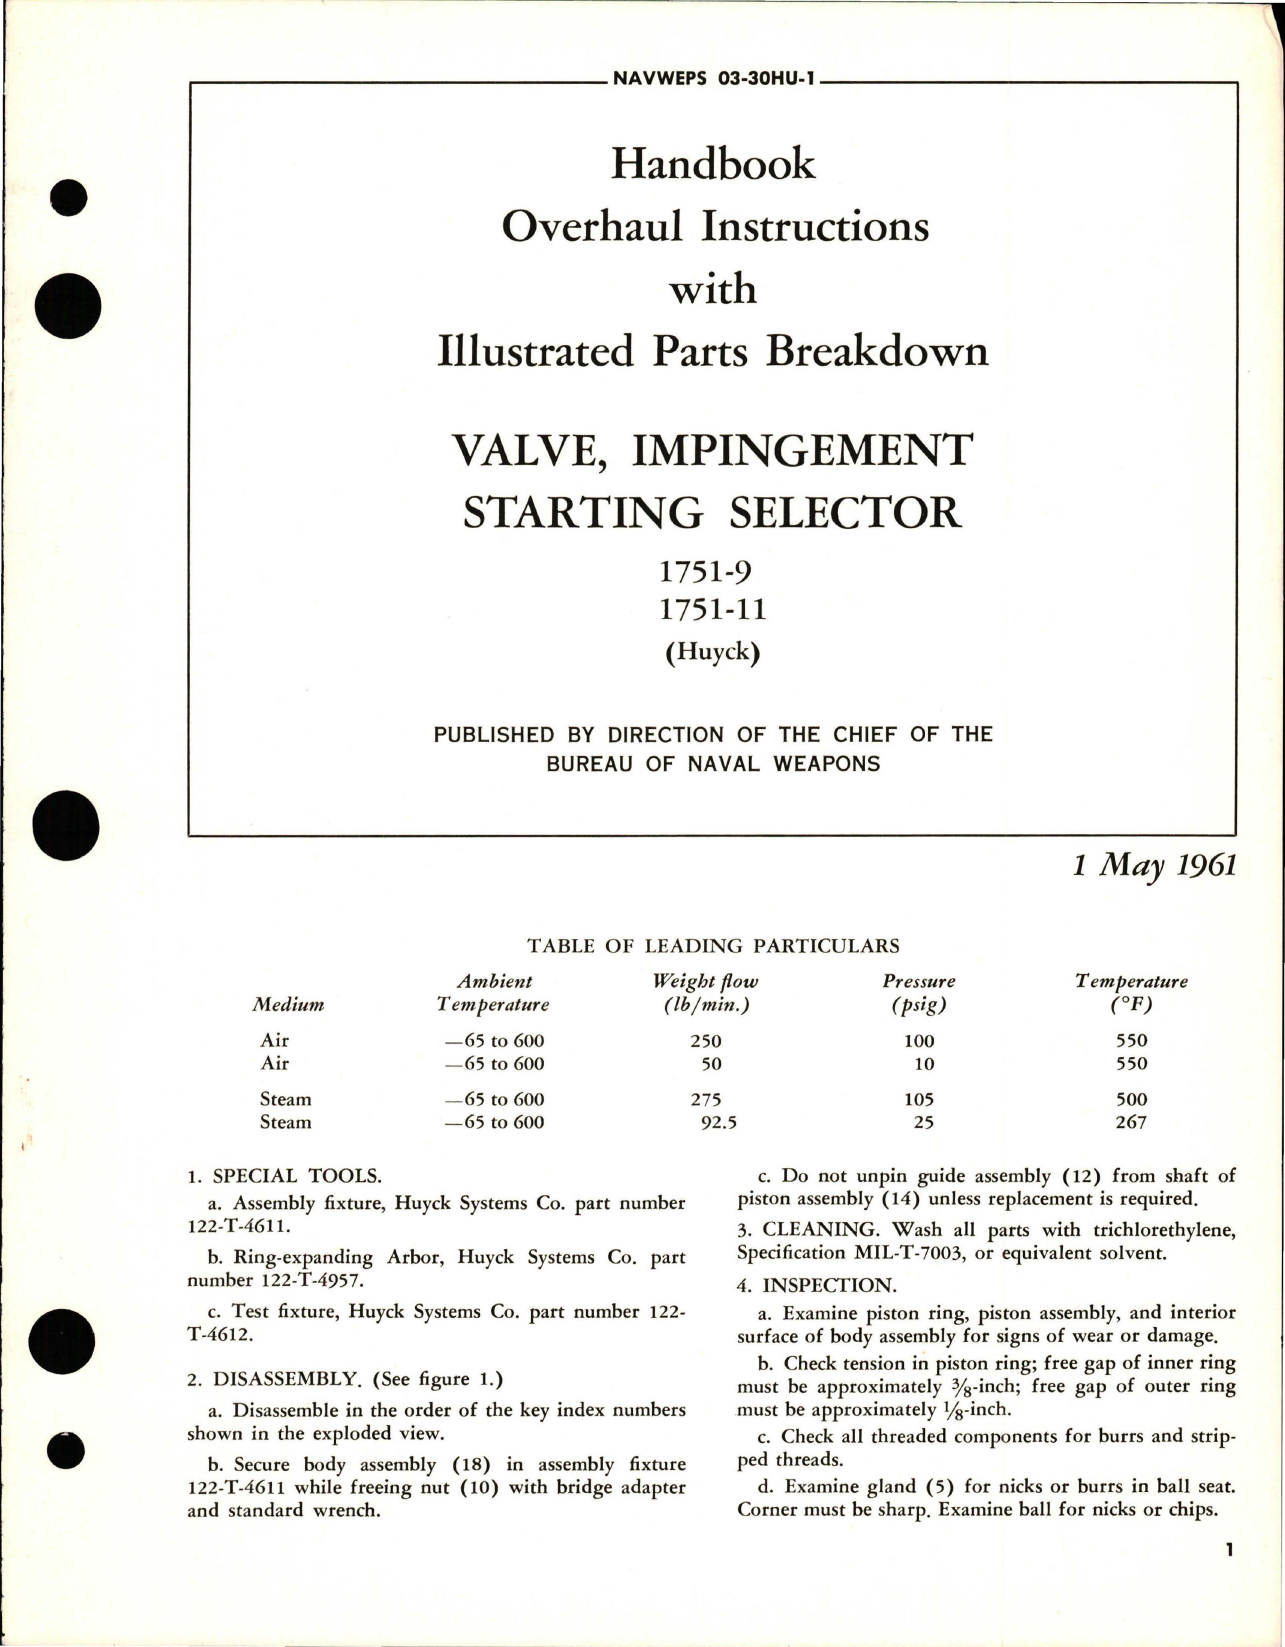 Sample page 1 from AirCorps Library document: Overhaul Instructions with Illustrated Parts Breakdown for Impingement Starting Selector Valve - 1751-9 and 1751-11